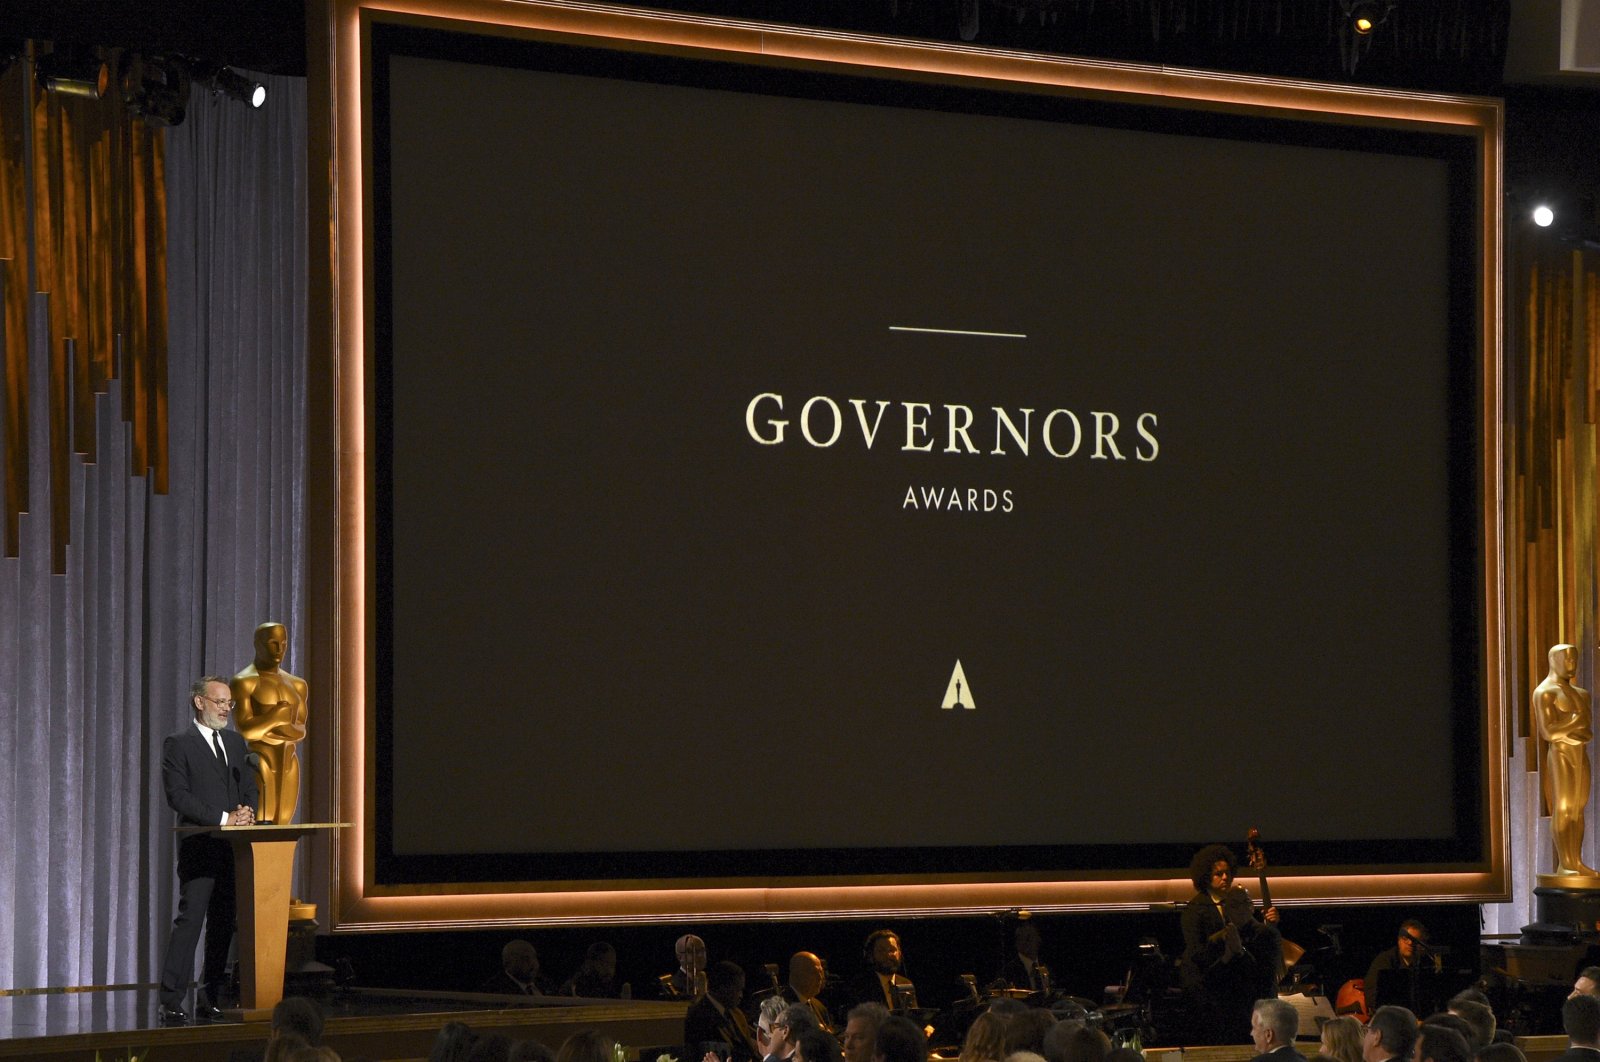 Tom Hanks speaks at the Governors Awards in Los Angeles, California, U.S., Oct. 27, 2019. (AP)